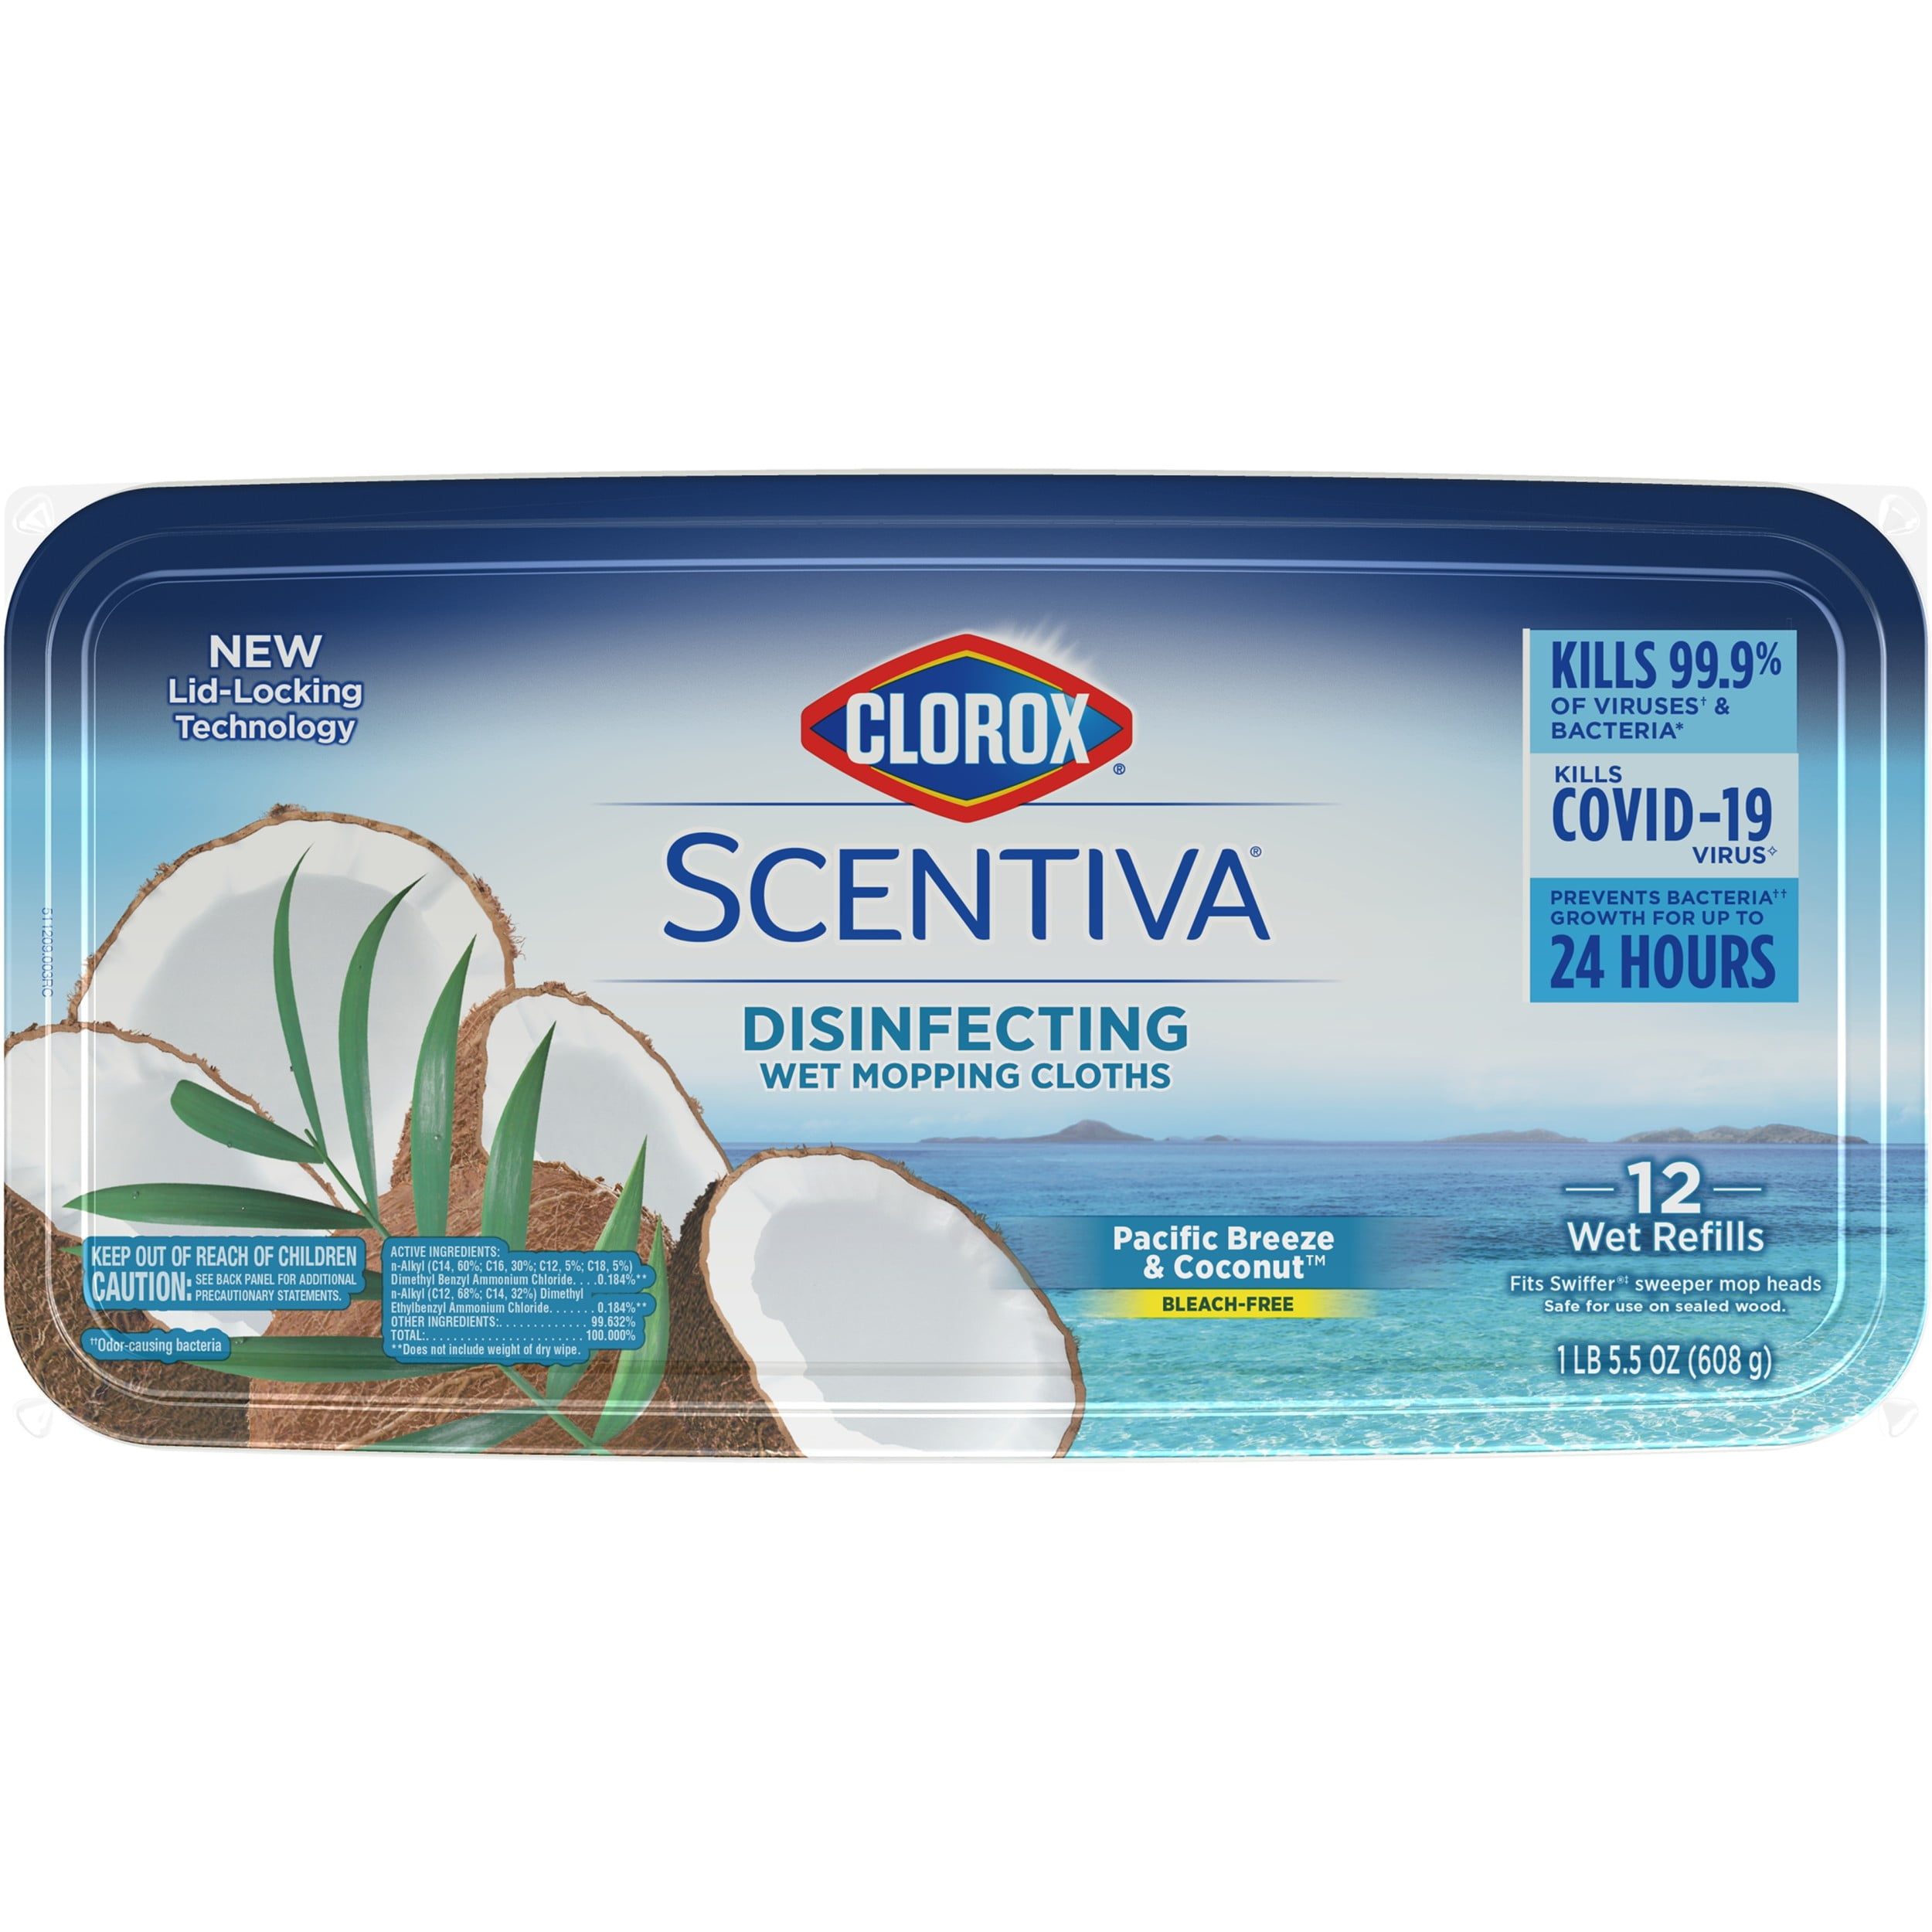 Clorox Scentiva Disinfecting Wet Mop Pads, Pacific Breeze and Coconut, 12 Count